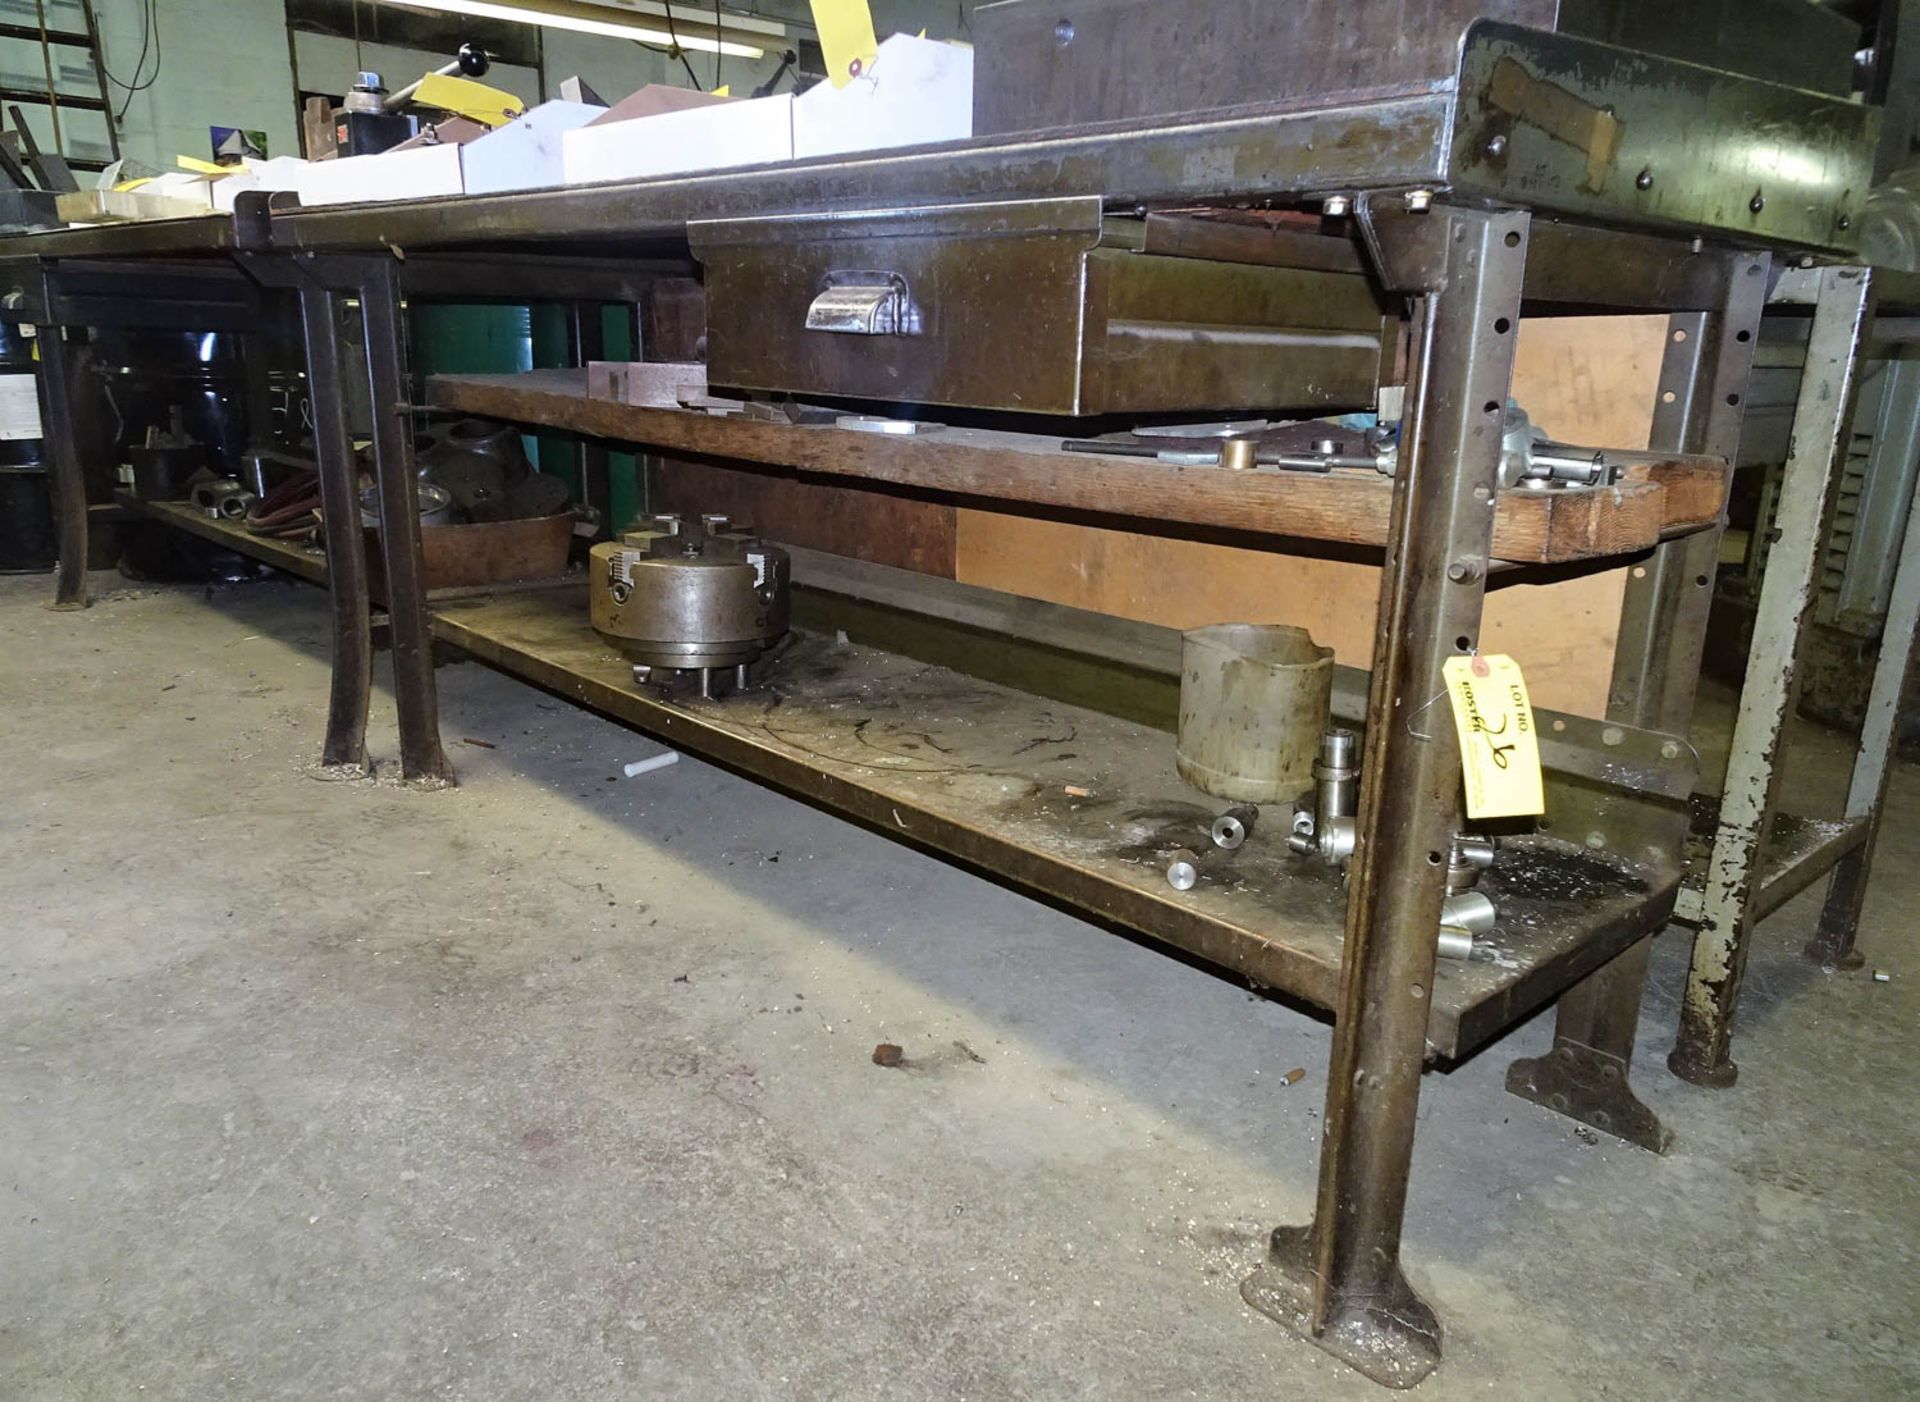 (2) STEEL FRAMED WORK BENCHES WITH CONTENTS OF LOWER SHELVING, INCLUDING: TOOLING (PLEASE SEE